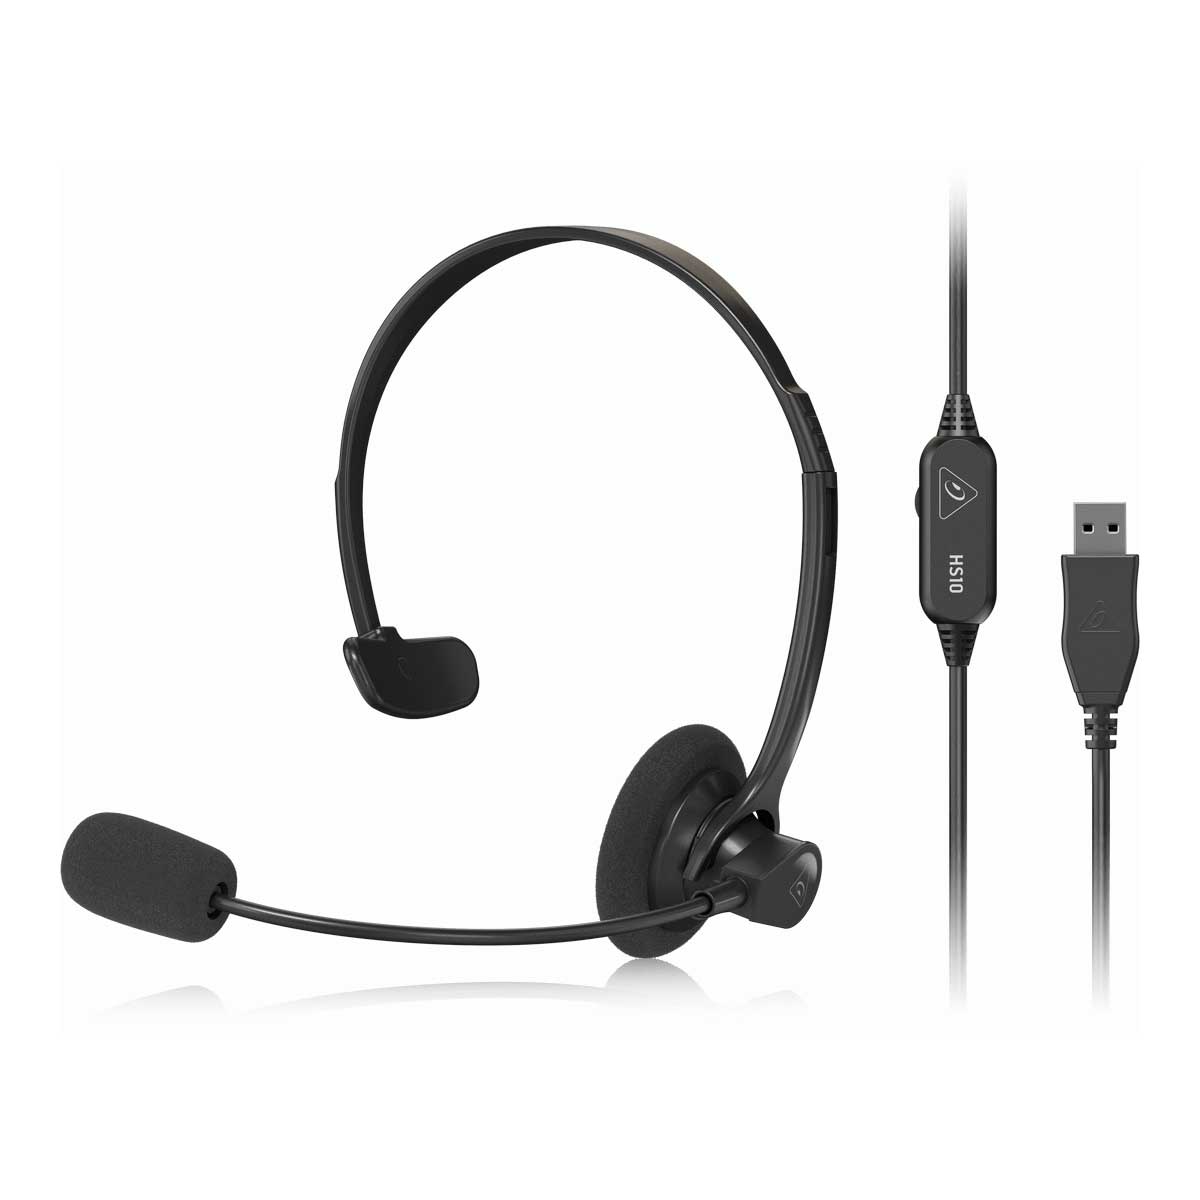 Behringer HS10 USB Mono Headset with Mic